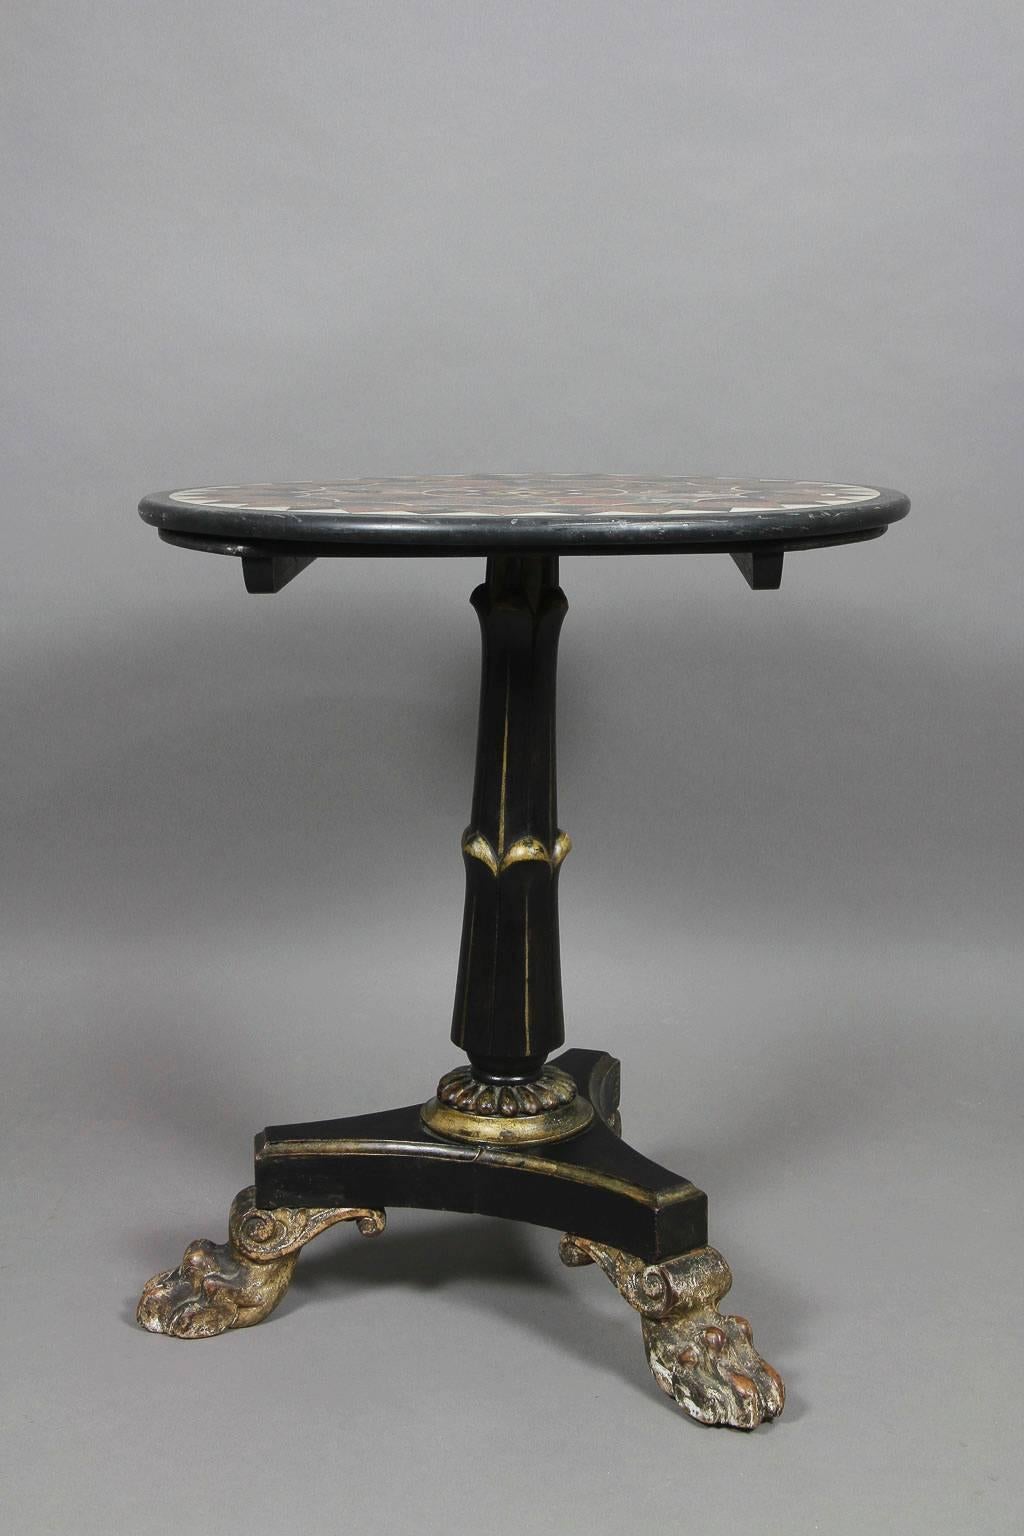 Circular top with various stone inlays on a tapered support with lotus carving ending on a tripod base with lions paw feet. The table is period but reduced in height.